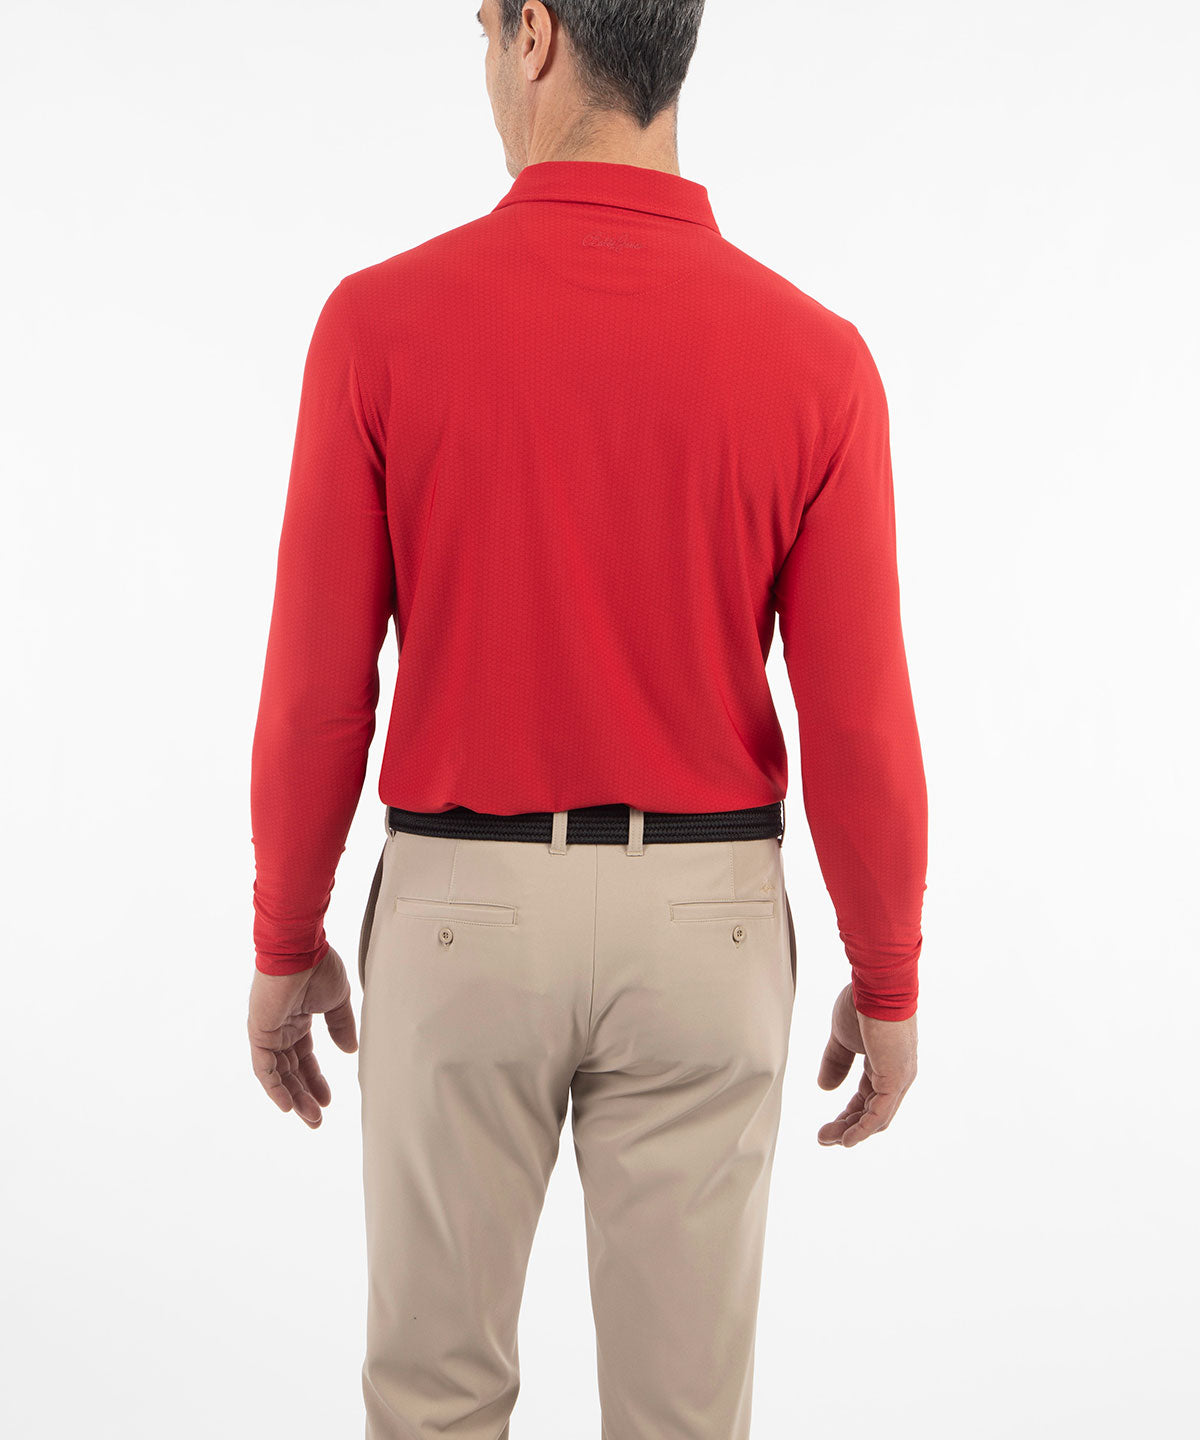 A man in a red shirt and grey pants photo – Free Usa Image on Unsplash